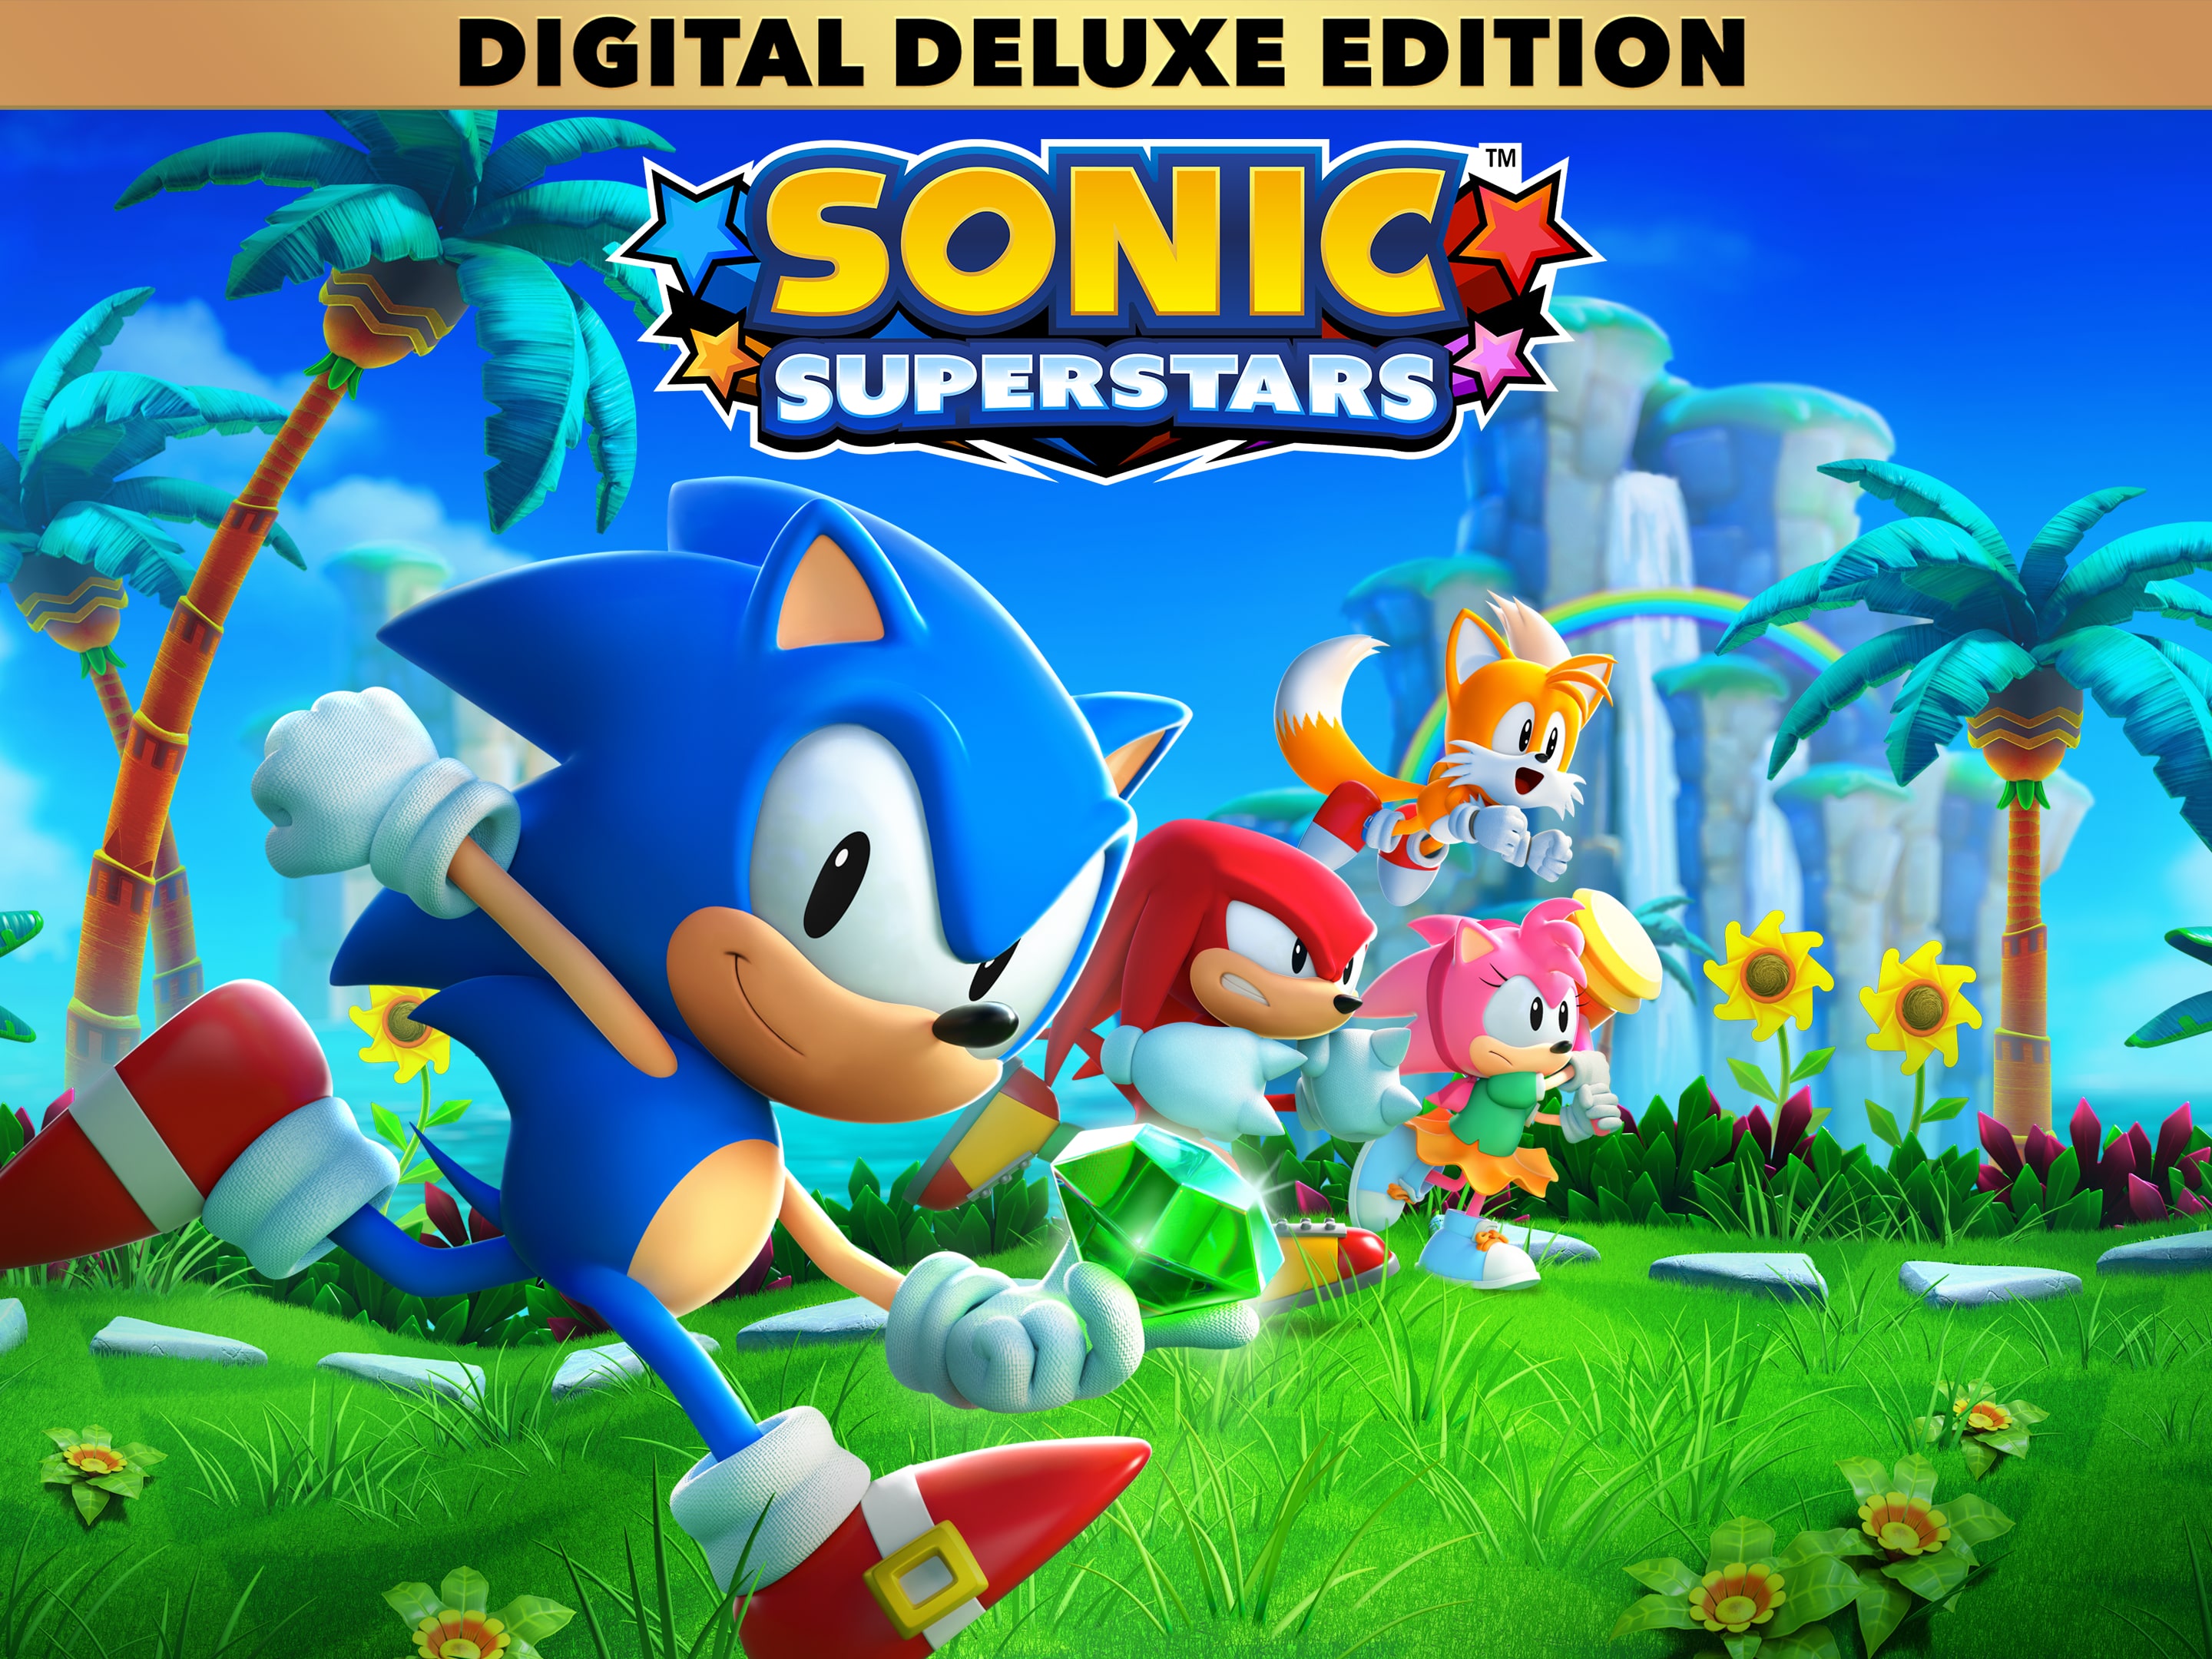 PS5 ver.) Sonic Superstars DX Pack (Limited Edition)